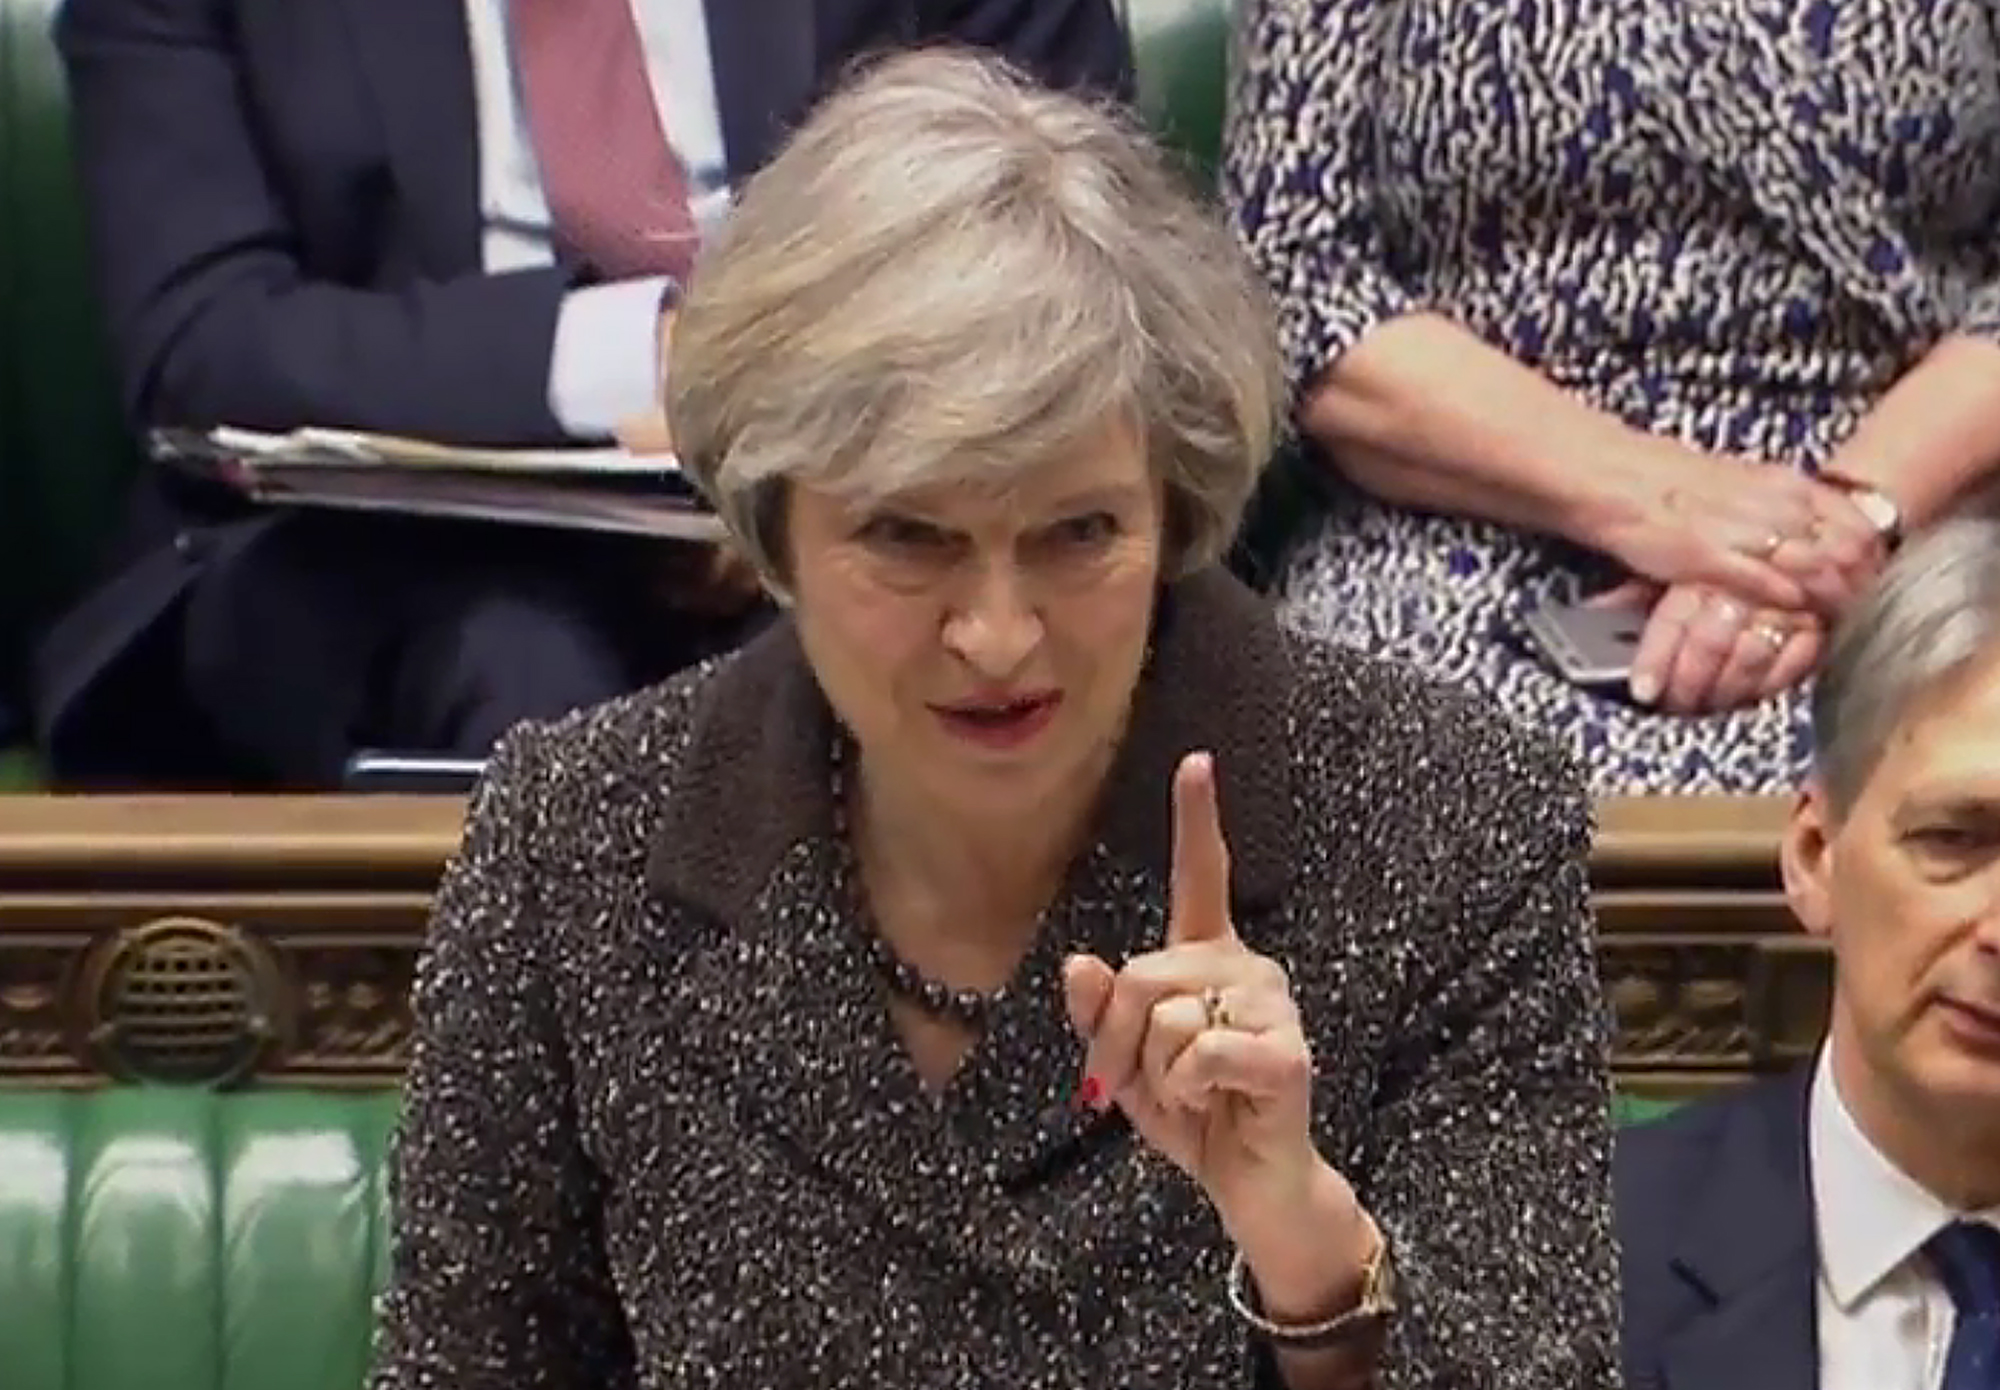 A video grab from footage broadcast by the UK Parliament's Parliamentary Recording Unit (PRU) shows British Prime Minister Theresa May as she reacts to heckling during her speech in the House of Commons in London on March 14, 2017. British Prime Minister Theresa May will make a major statement to parliament on Tuesday, just hours after MPs enabled her to start the withdrawal process from the European Union. / AFP PHOTO / PRU AND AFP PHOTO / HO / RESTRICTED TO EDITORIAL USE - MANDATORY CREDIT " AFP PHOTO / PRU " - NO MARKETING NO ADVERTISING CAMPAIGNS - NO RESALE - NO DISTRIBUTION TO THIRD PARTIES - 24 HOURS USE - NO ARCHIVES